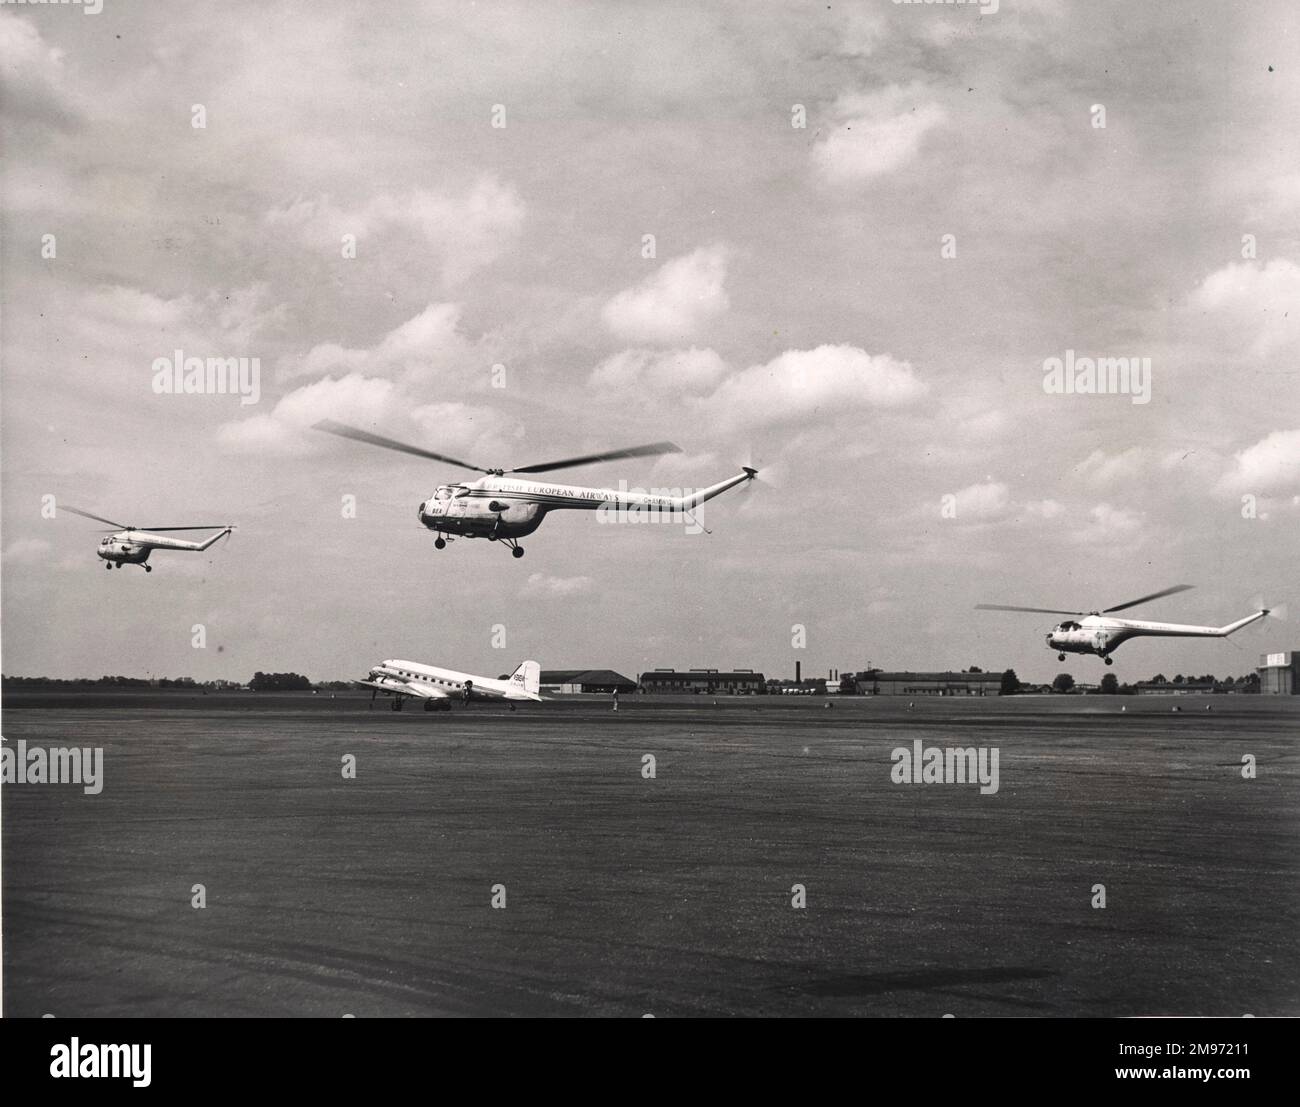 Three Bristol Sycamores (a Mk3 and two Mk3As) of British European Airways inaugurate a scheduled passenger service between Southampton (Eastleigh Airport), London Airport and Northolt. The helicopters are taking of from London Airport. Fares were 30 shillings, single and £2 10 shillings, monthly return. Stock Photo